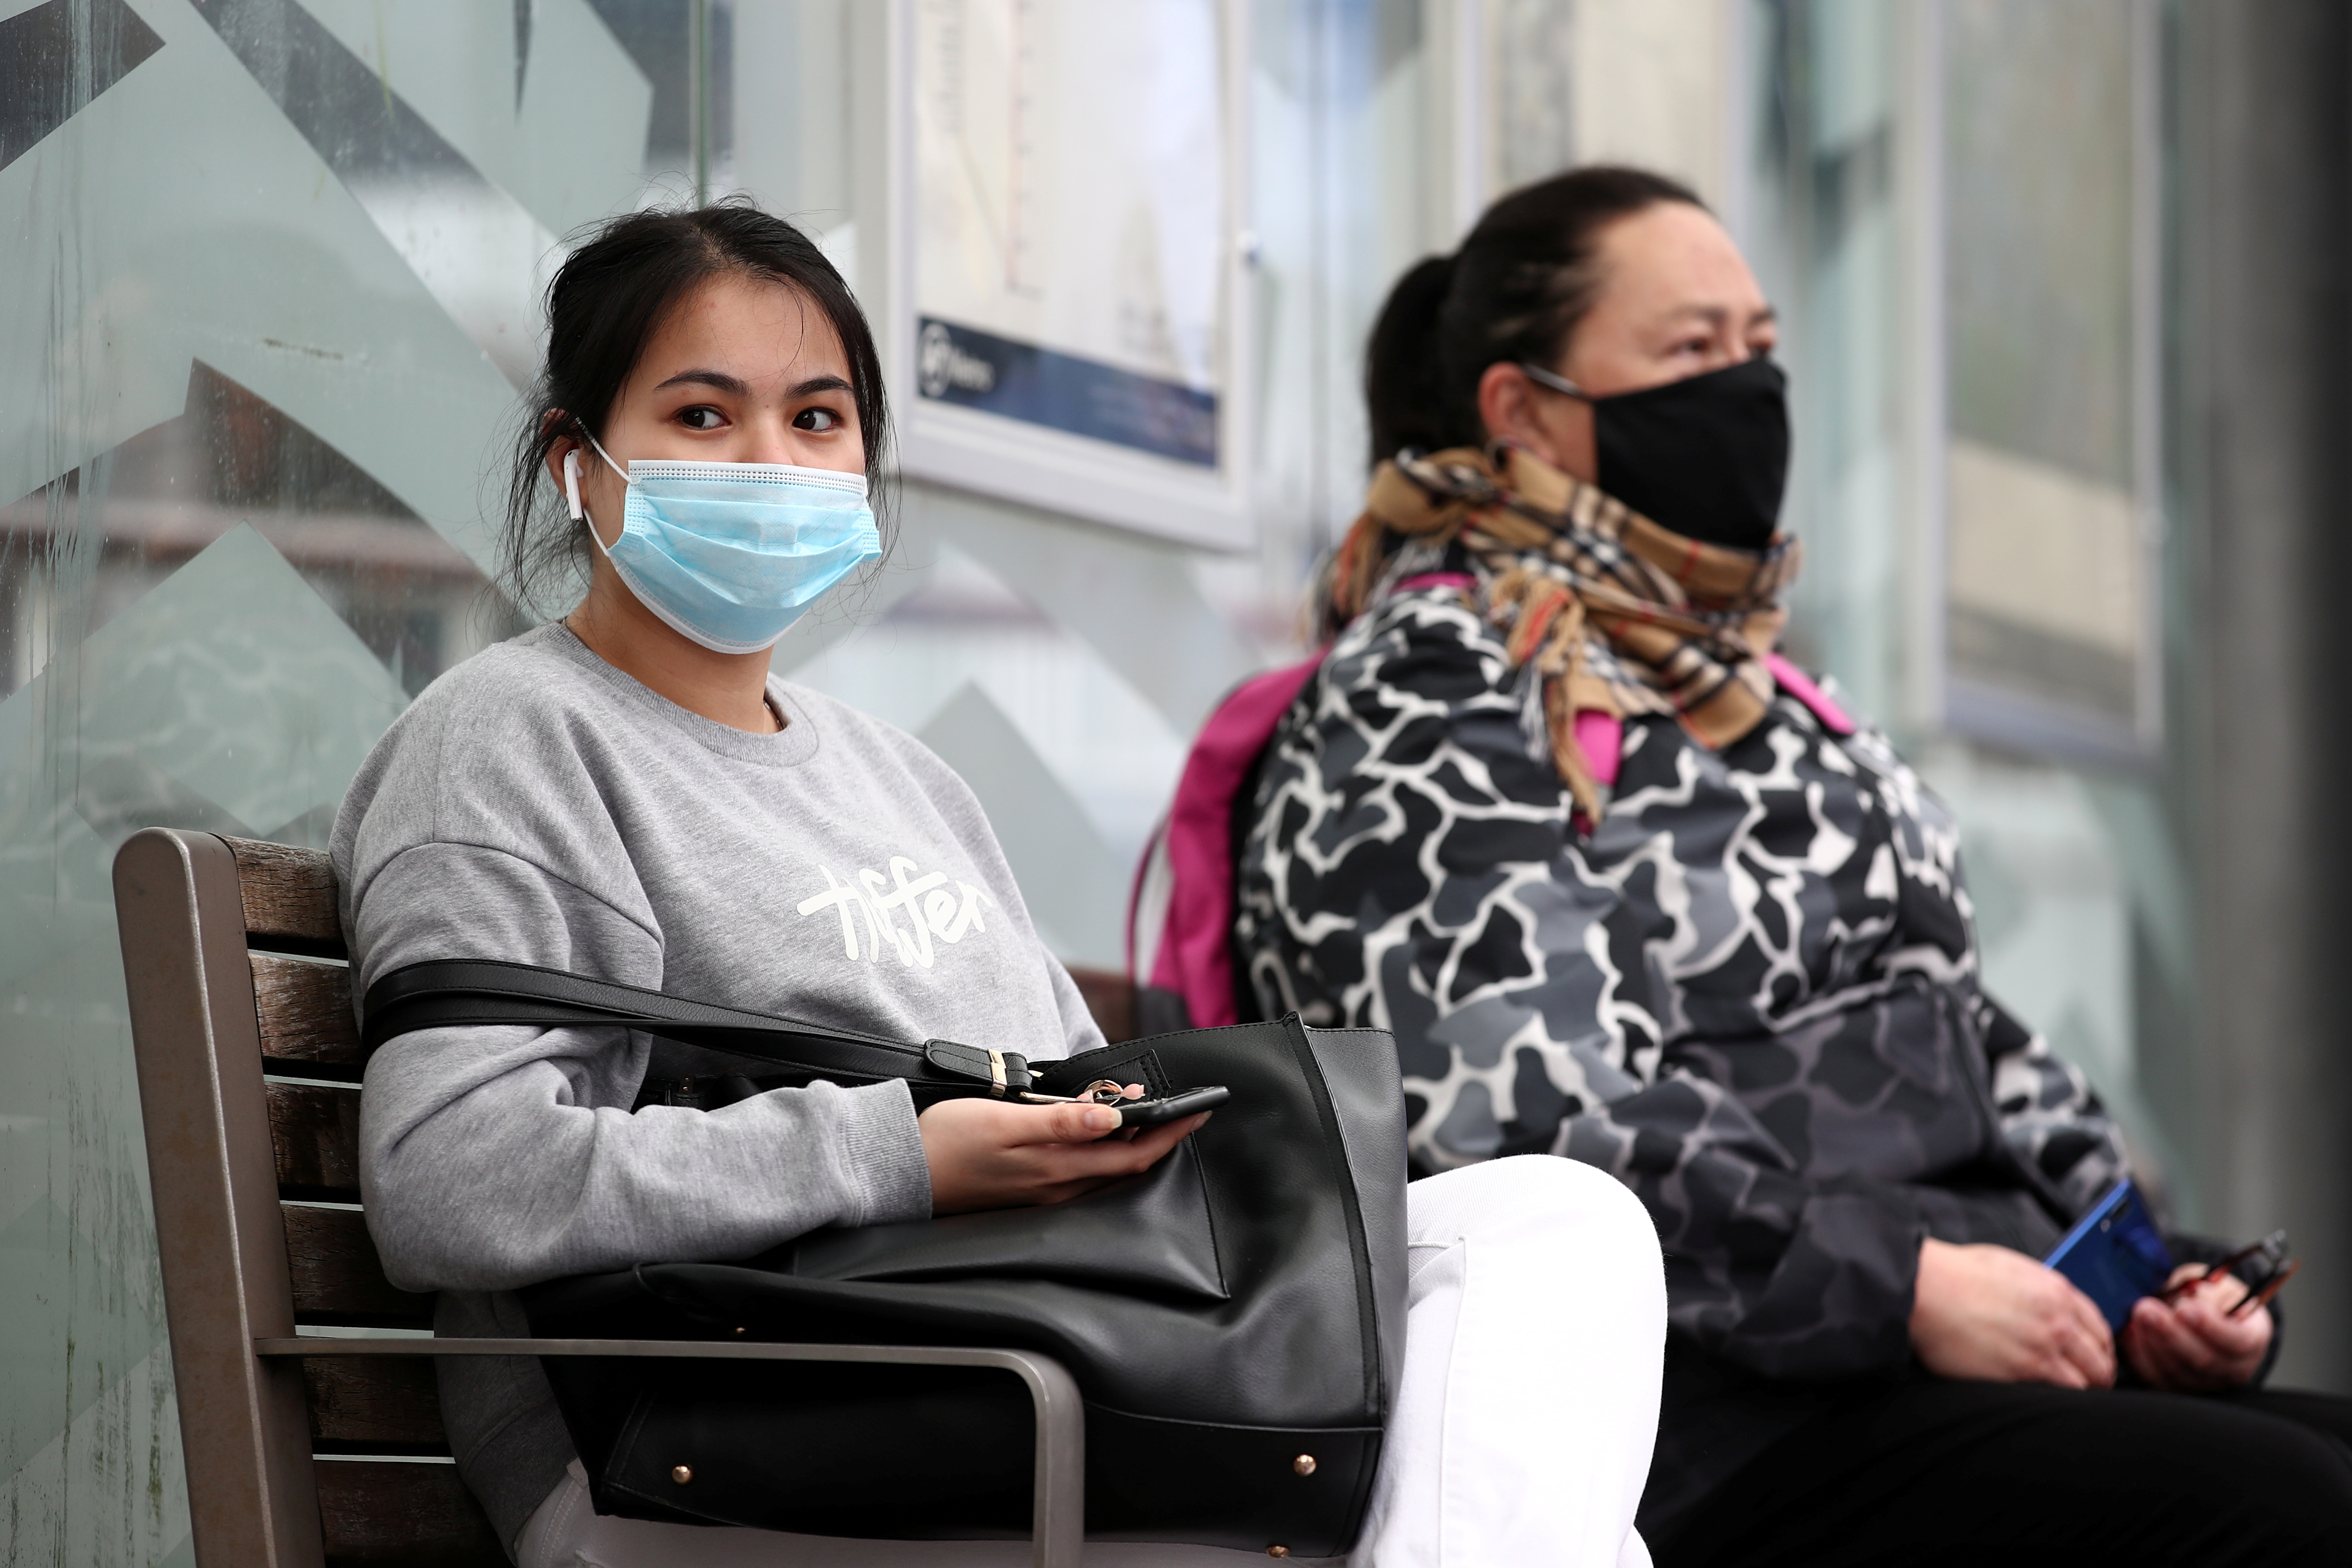 People wearing face masks wait for a bus on the first day of New Zealand's new coronavirus disease (COVID-19) safety measure that mandates wearing of a mask on public transport, in Auckland, New Zealand, August 31, 2020.  REUTERS/Fiona Goodall